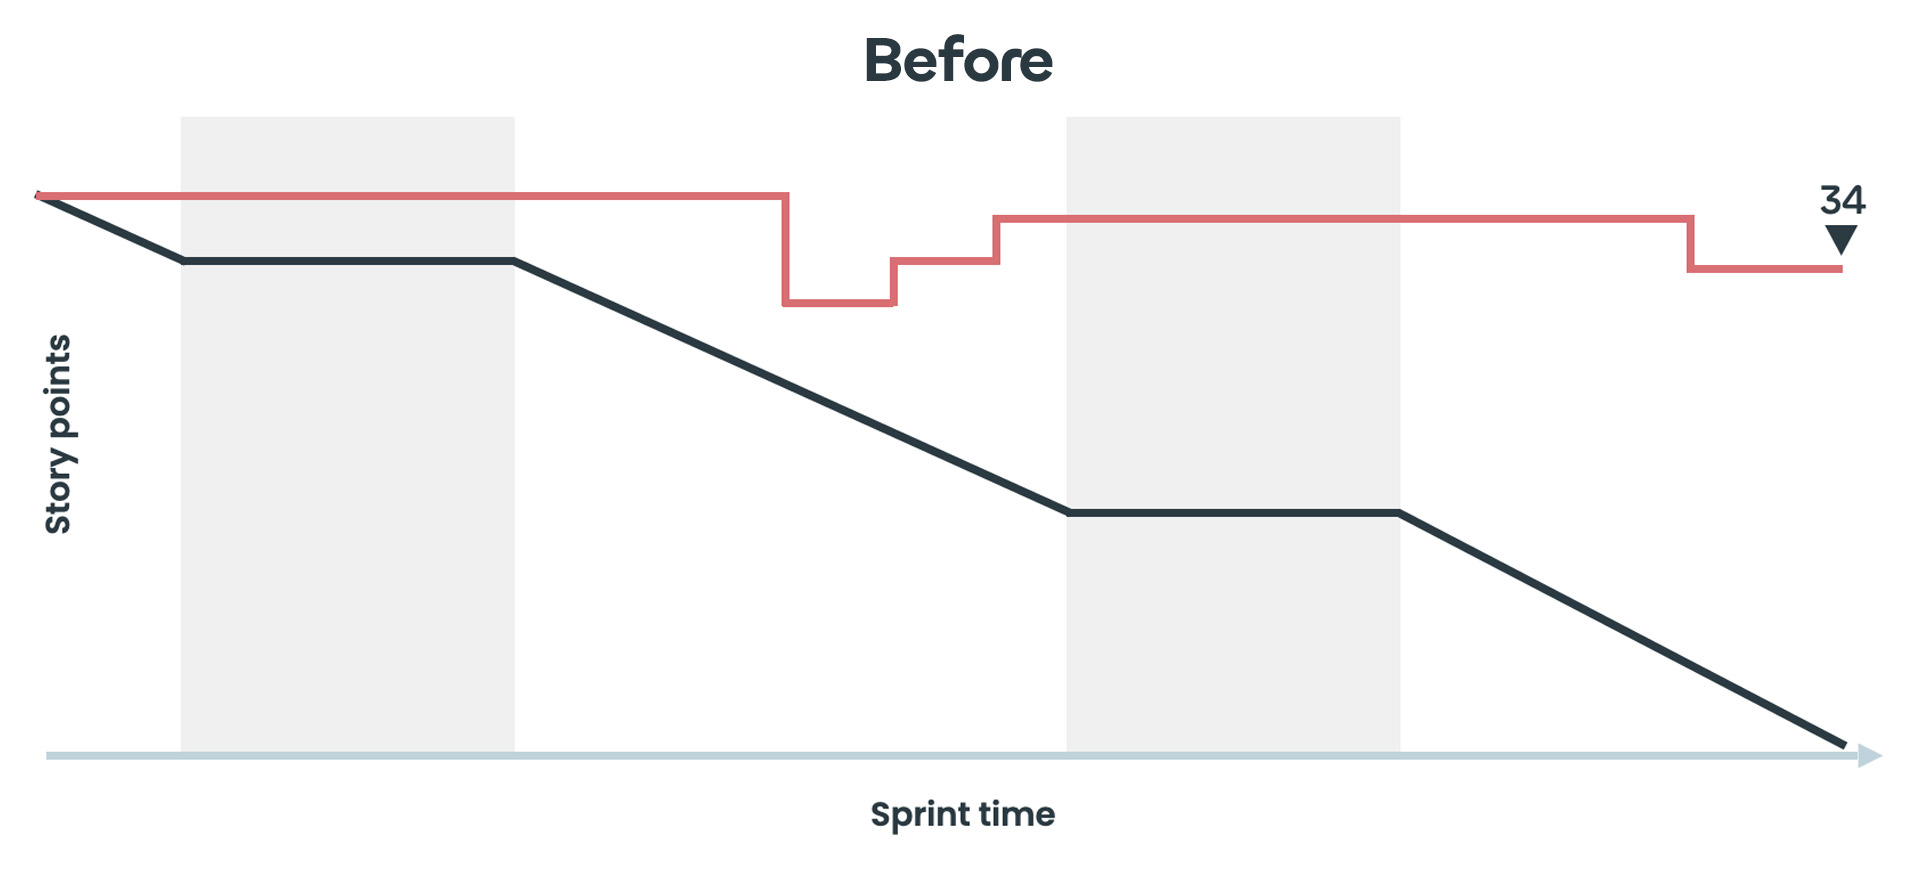 A graph showing the burndown in a sprint before the introduction of a component.